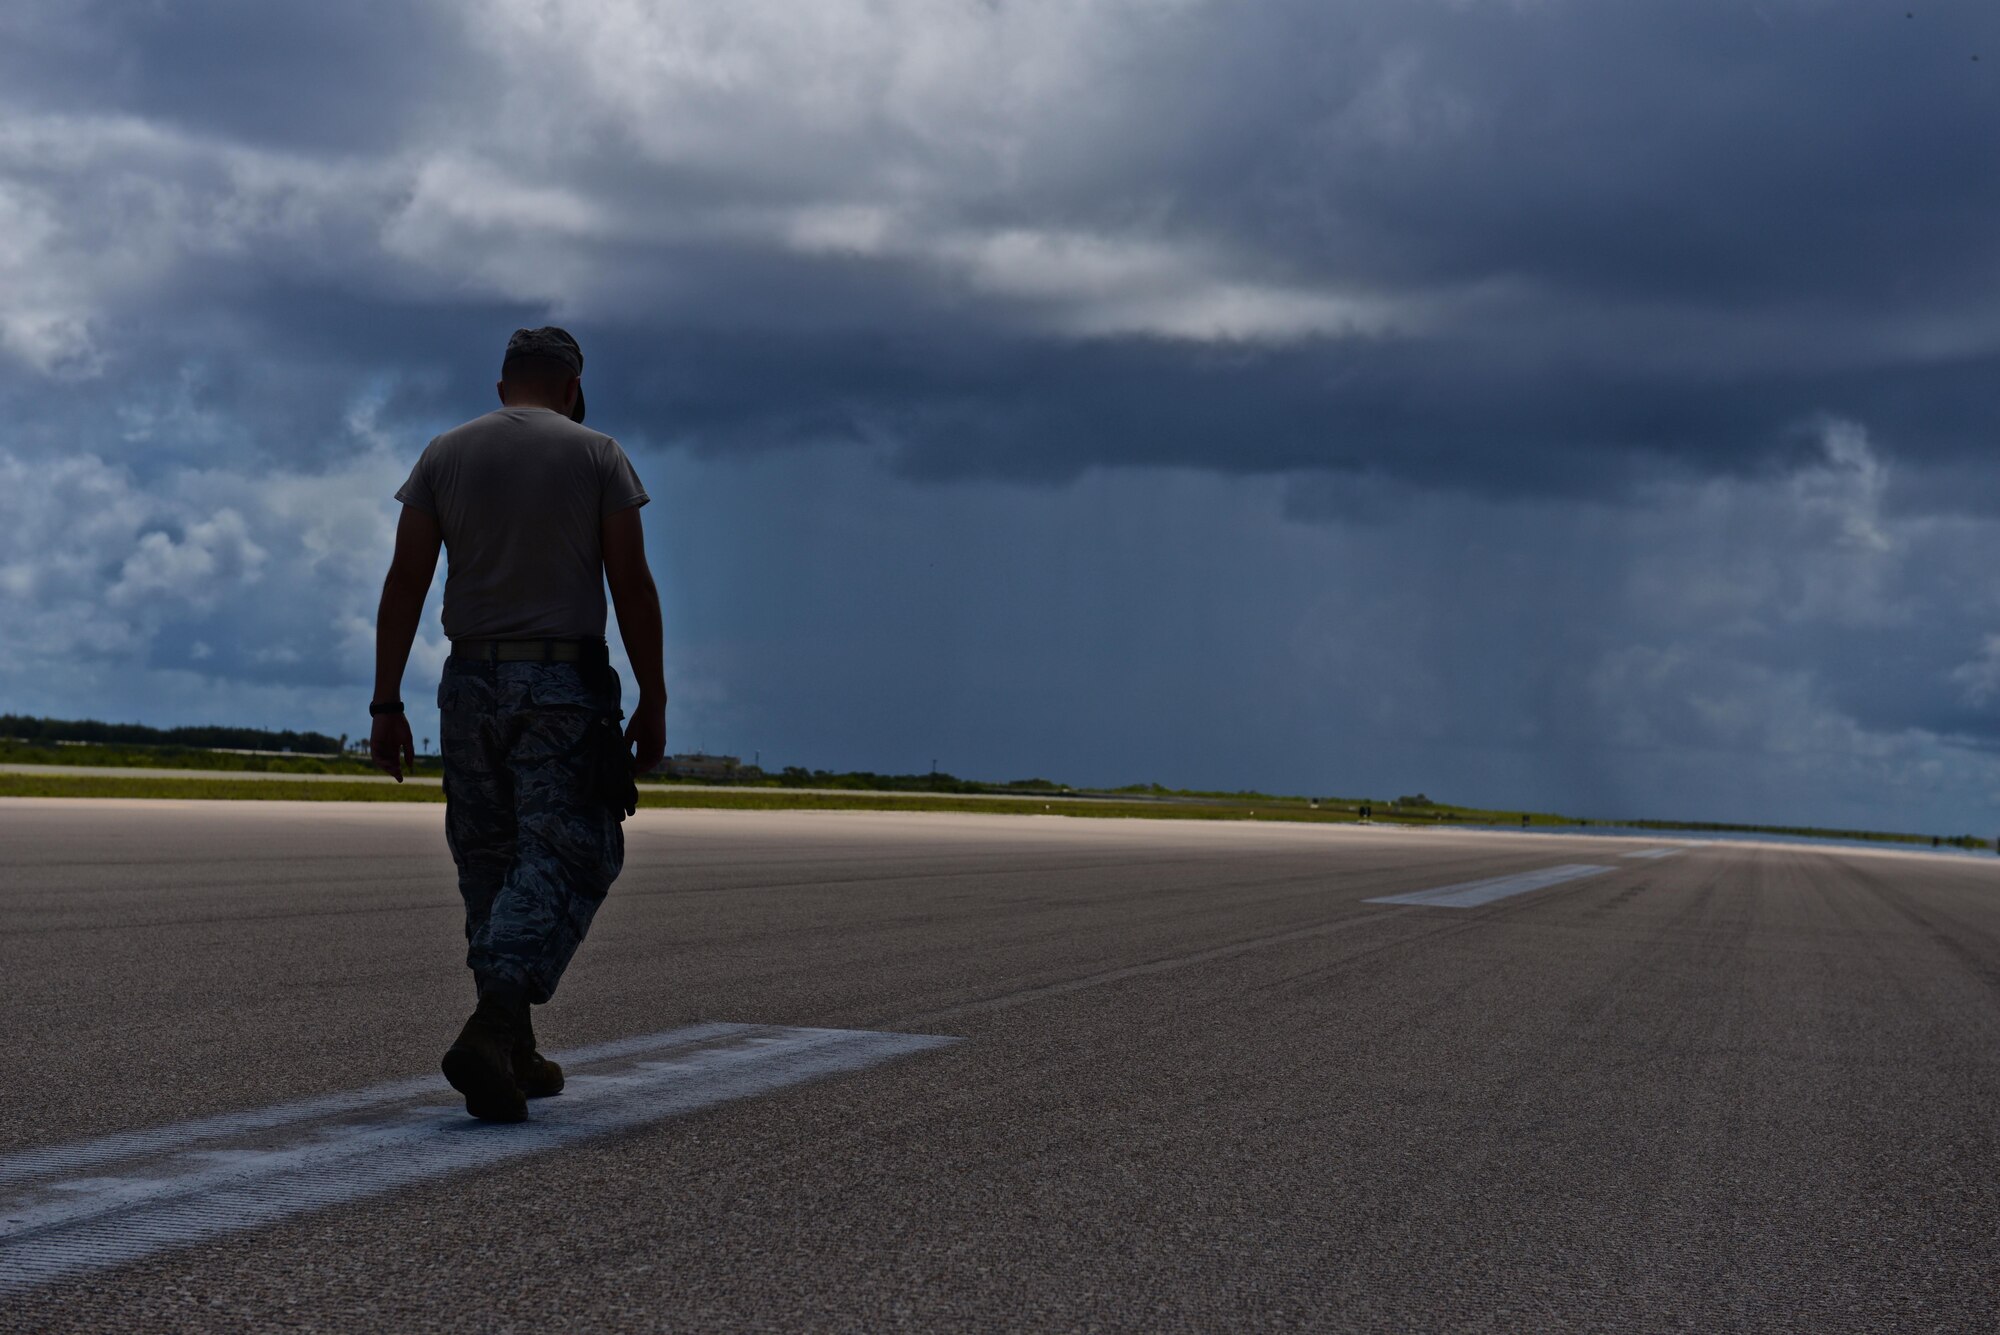 Capt. Clark Morgan, a 36th Mobility Response Squadron contingency engineer, surveys the pavement on Wake Island Airfield for cracks and other damage July 20, 2015, on Wake Island. A team with the 36th CRG at Andersen Air Force Base, Guam, deployed to the atoll to assist in airfield storm recovery efforts, and surveyed the runway to ensure adequate flightline safety. (U.S. Air Force photo/Senior Airman Alexander W. Riedel)